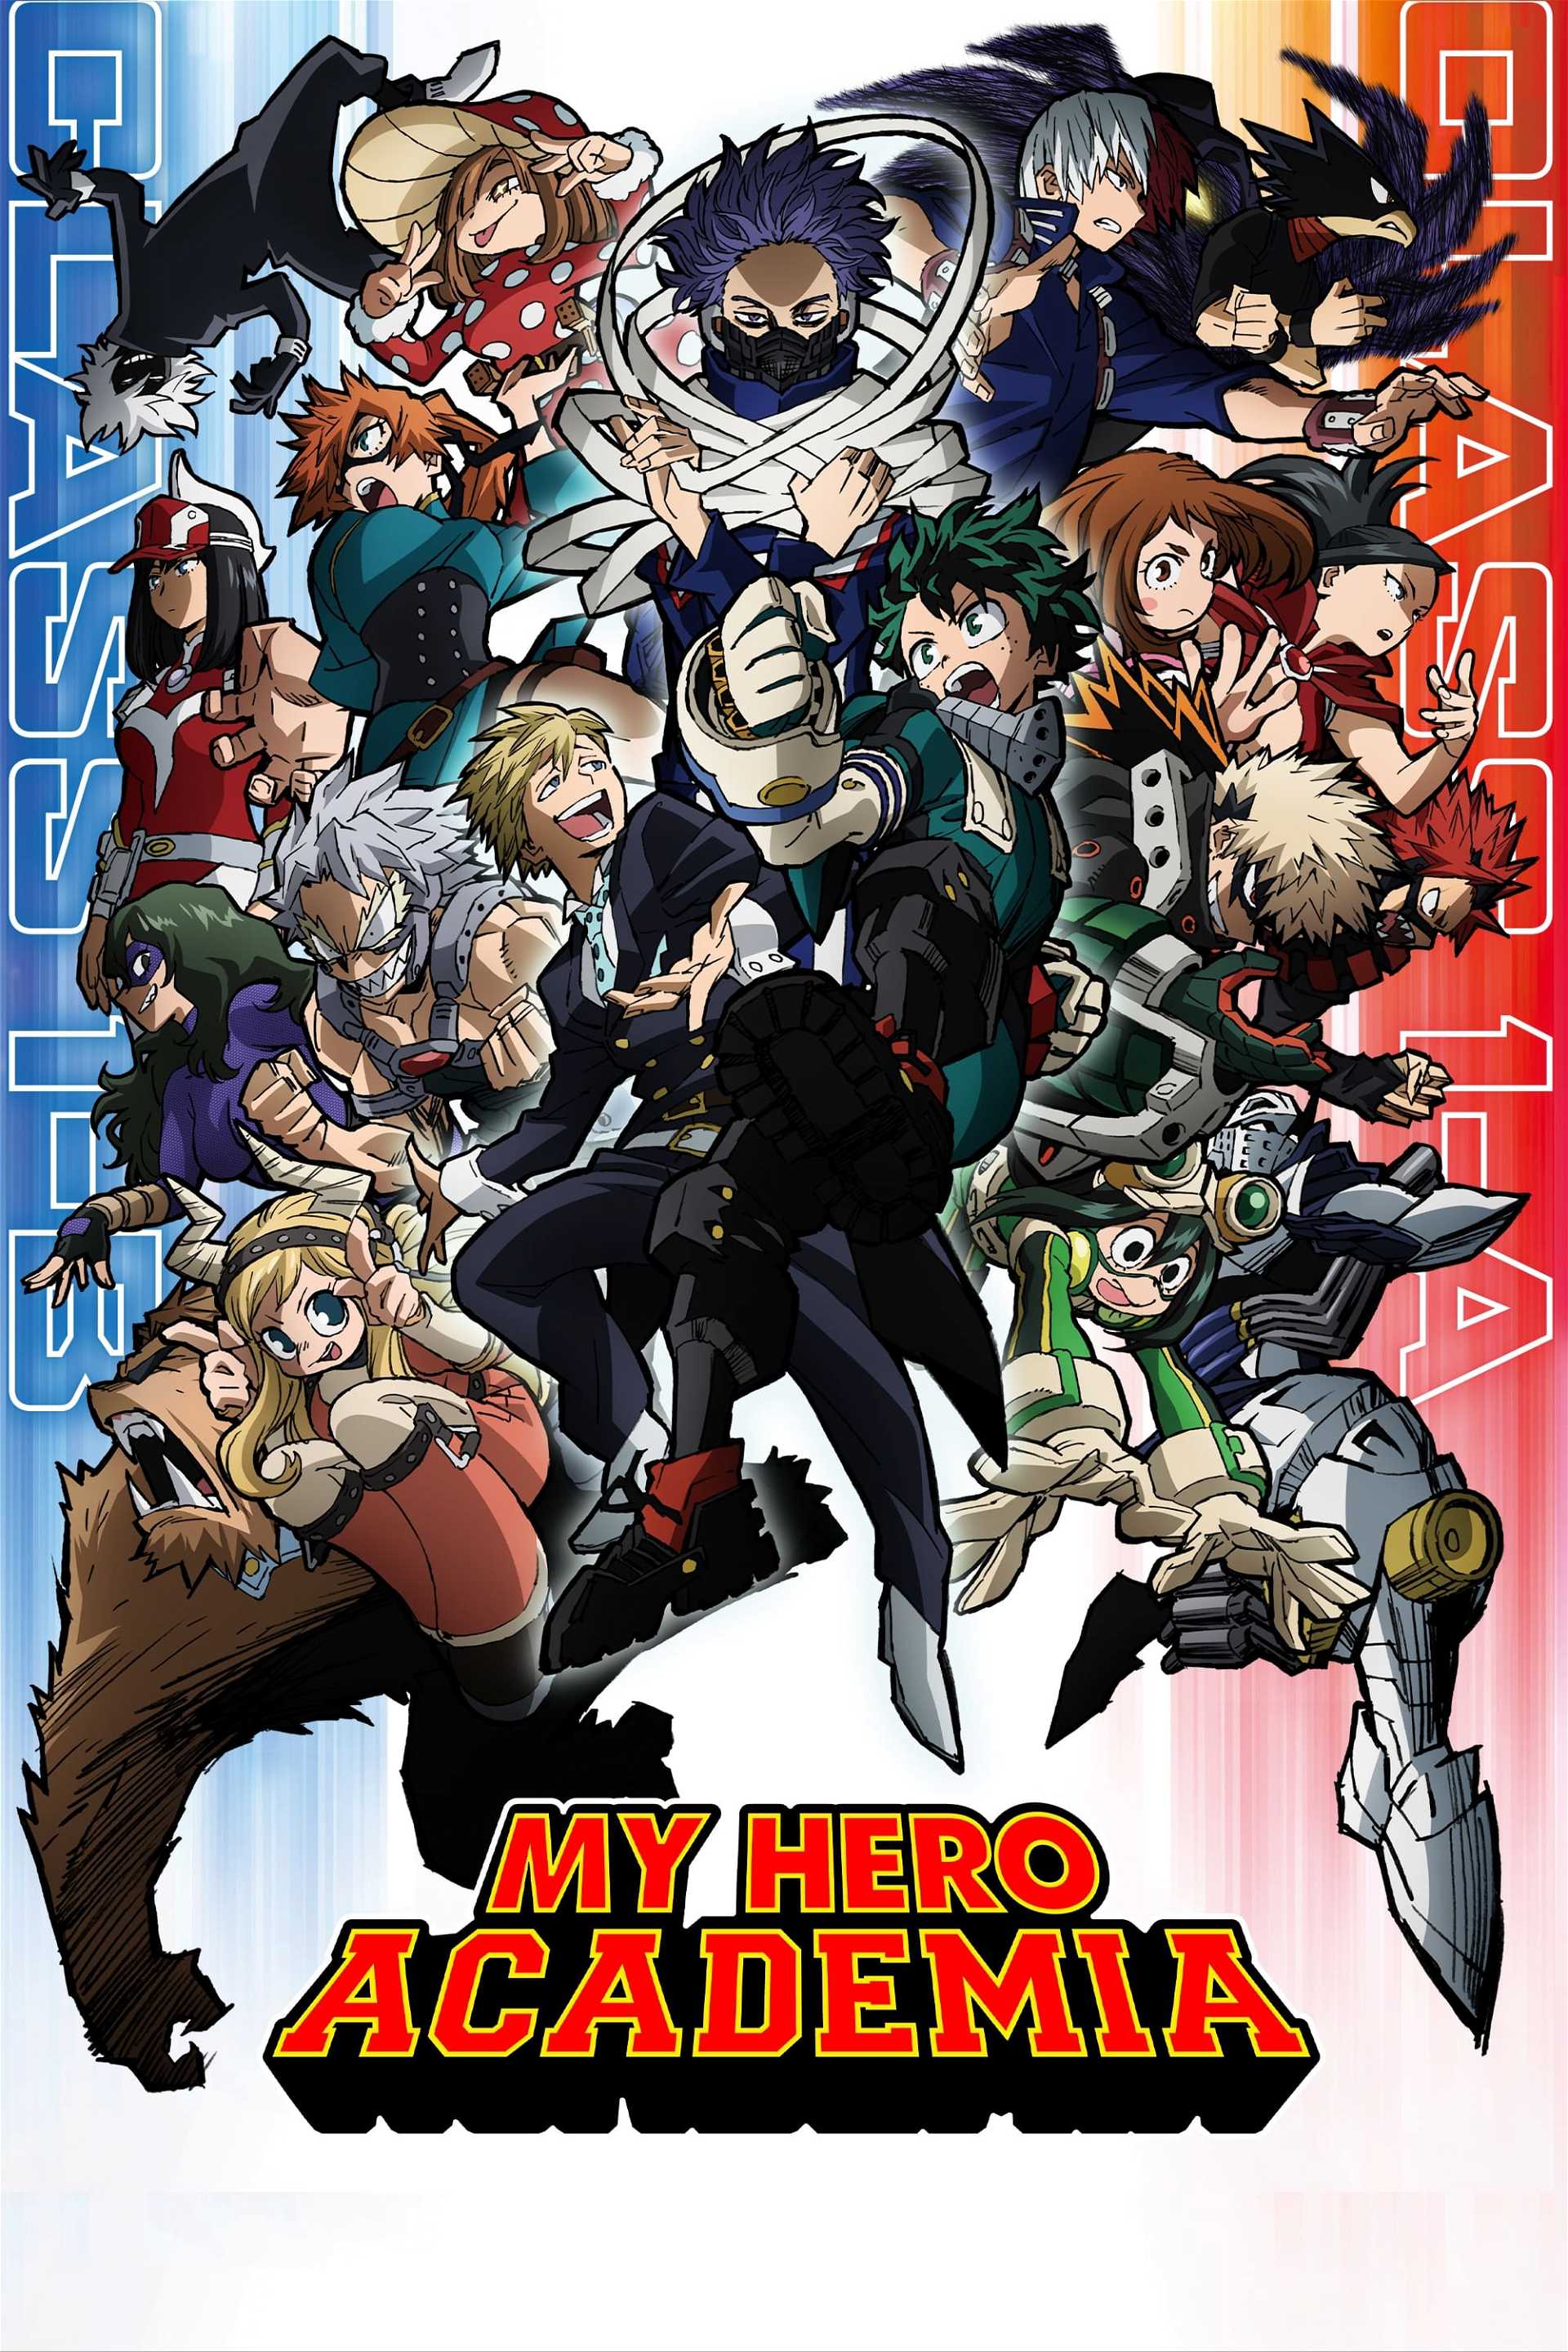 My Hero Academia in streaming